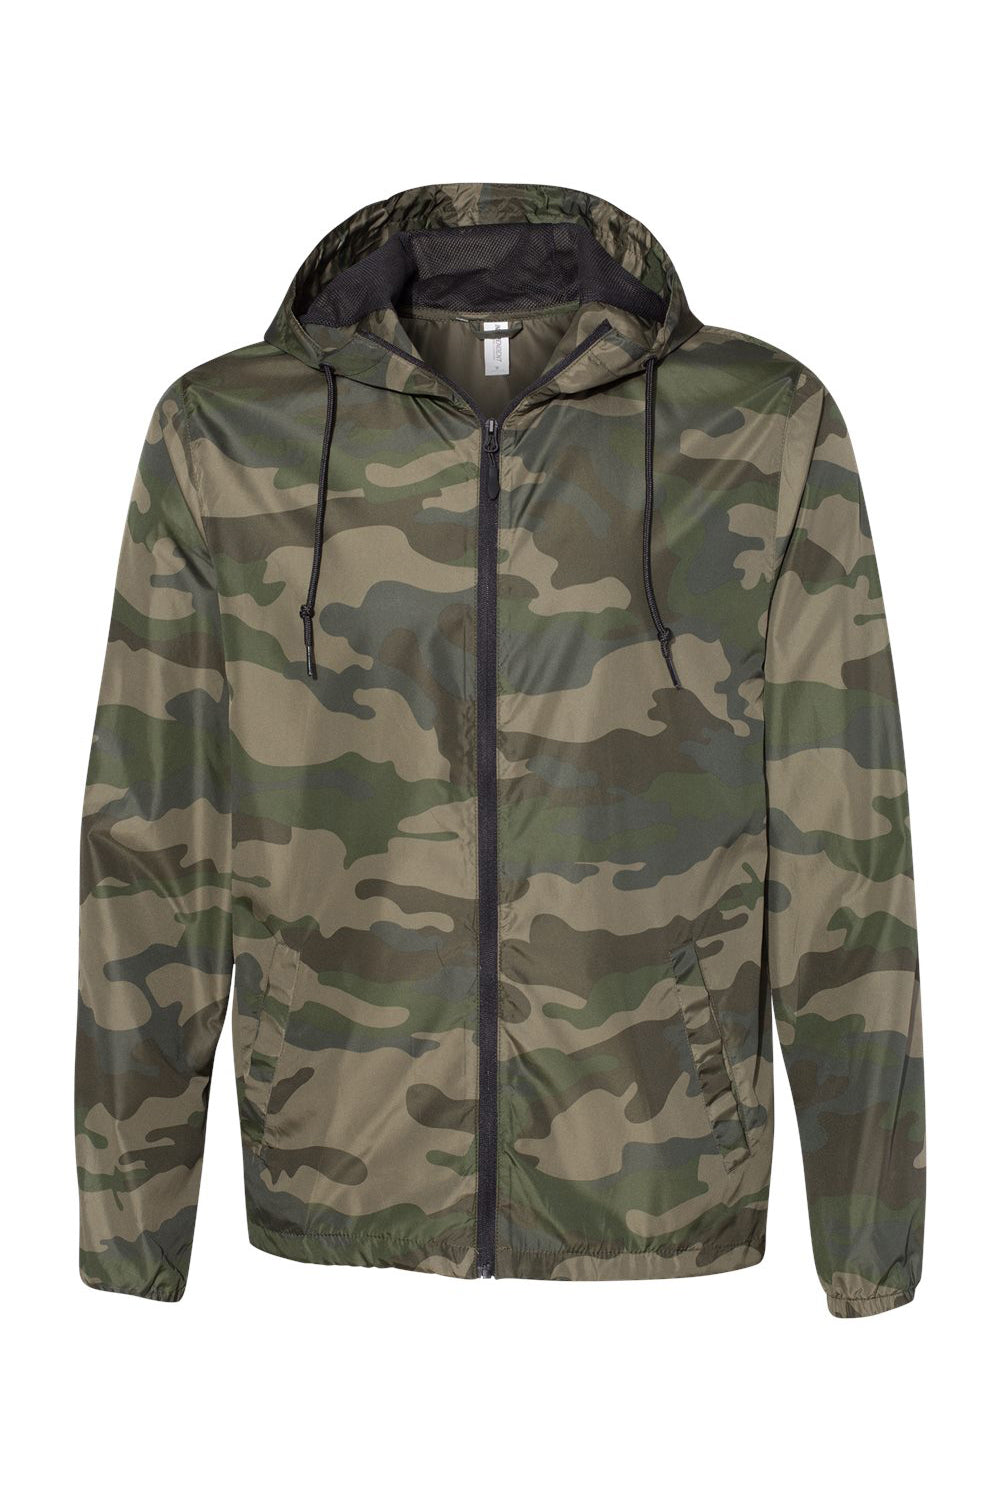 Independent Trading Co. EXP54LWZ Mens Full Zip Windbreaker Hooded Jacket Forest Green Camo Flat Front